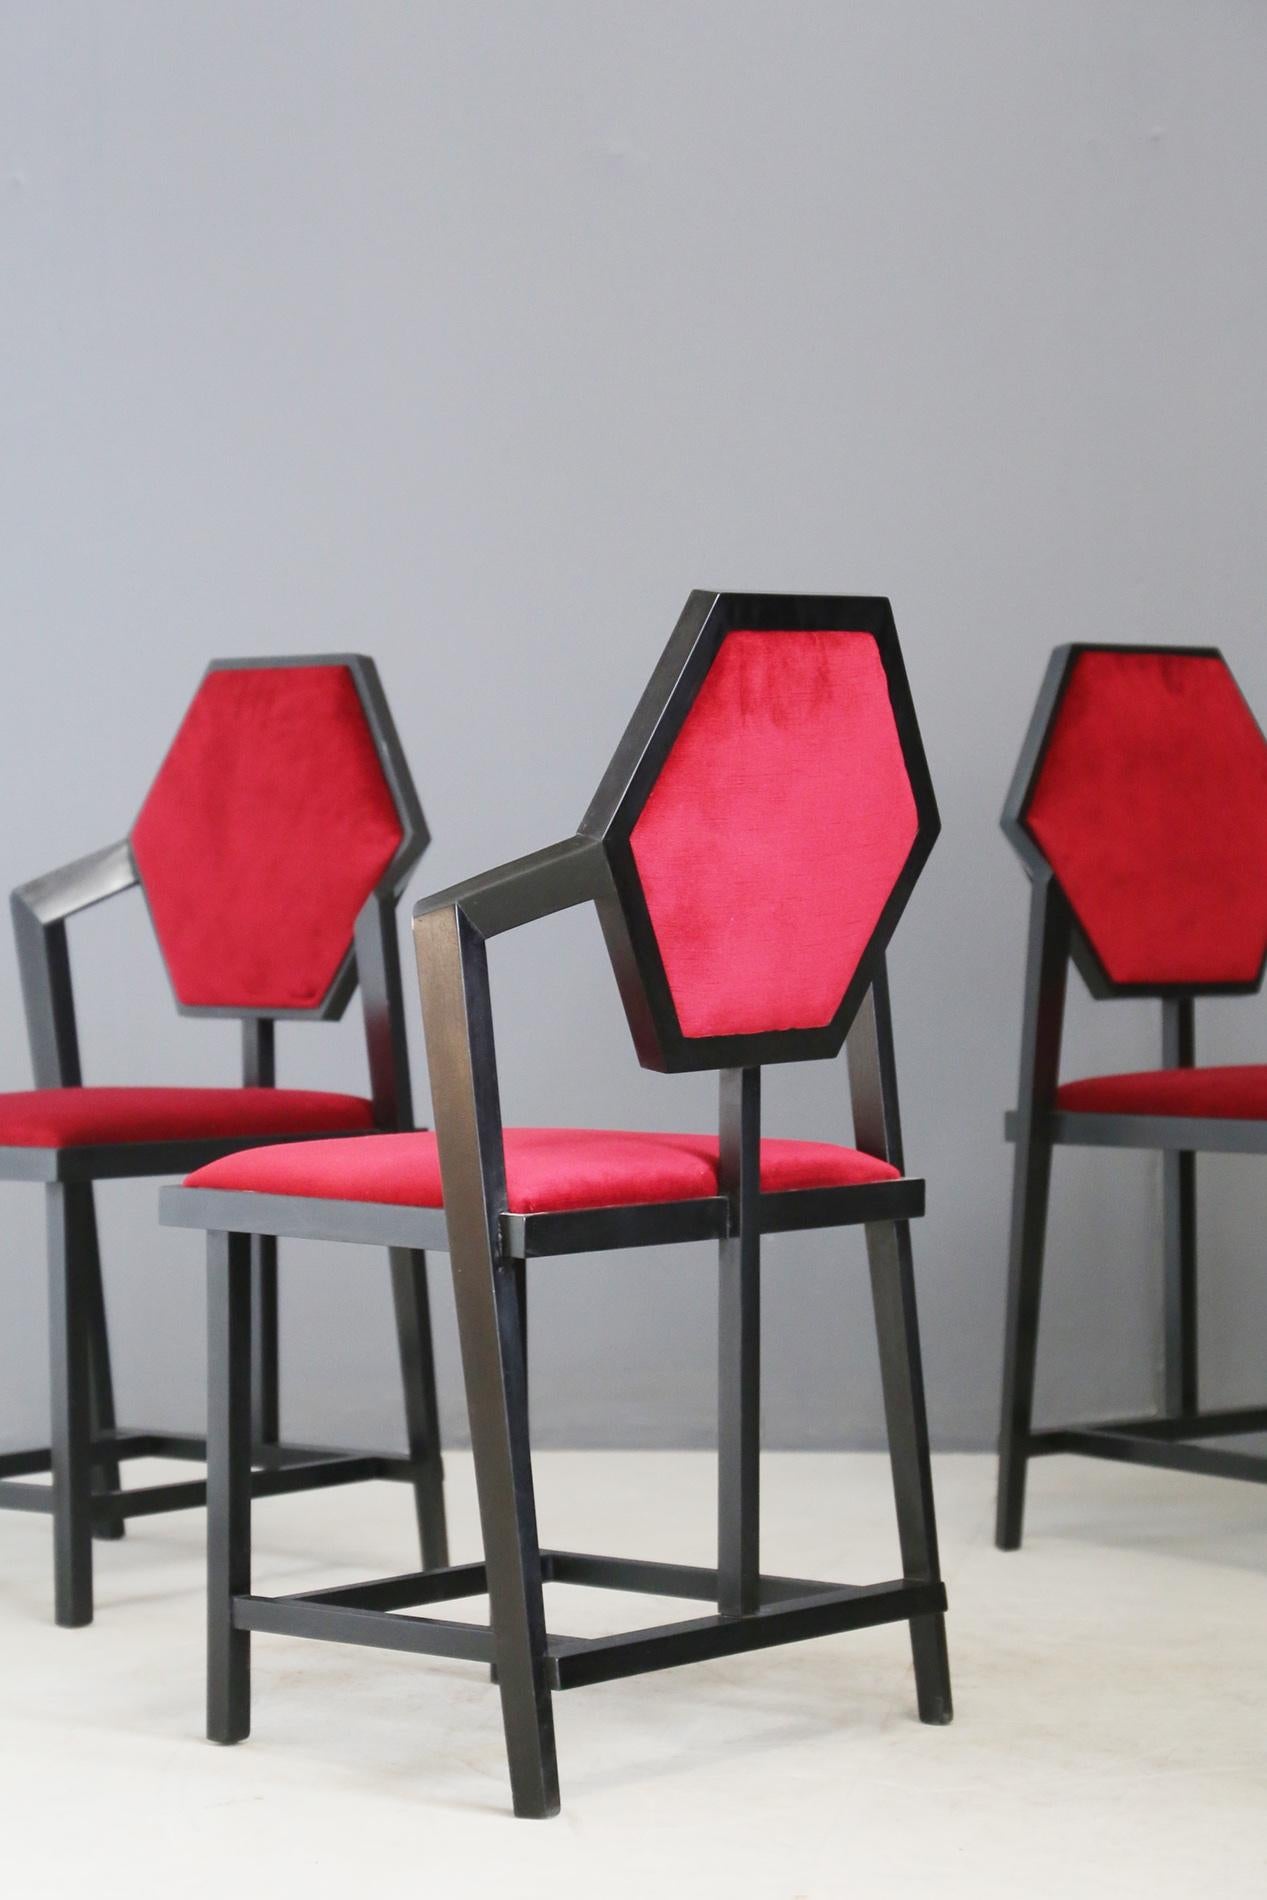 American Set of Six Red Chairs Designed by Frank Lloyd Wright from the 1980s